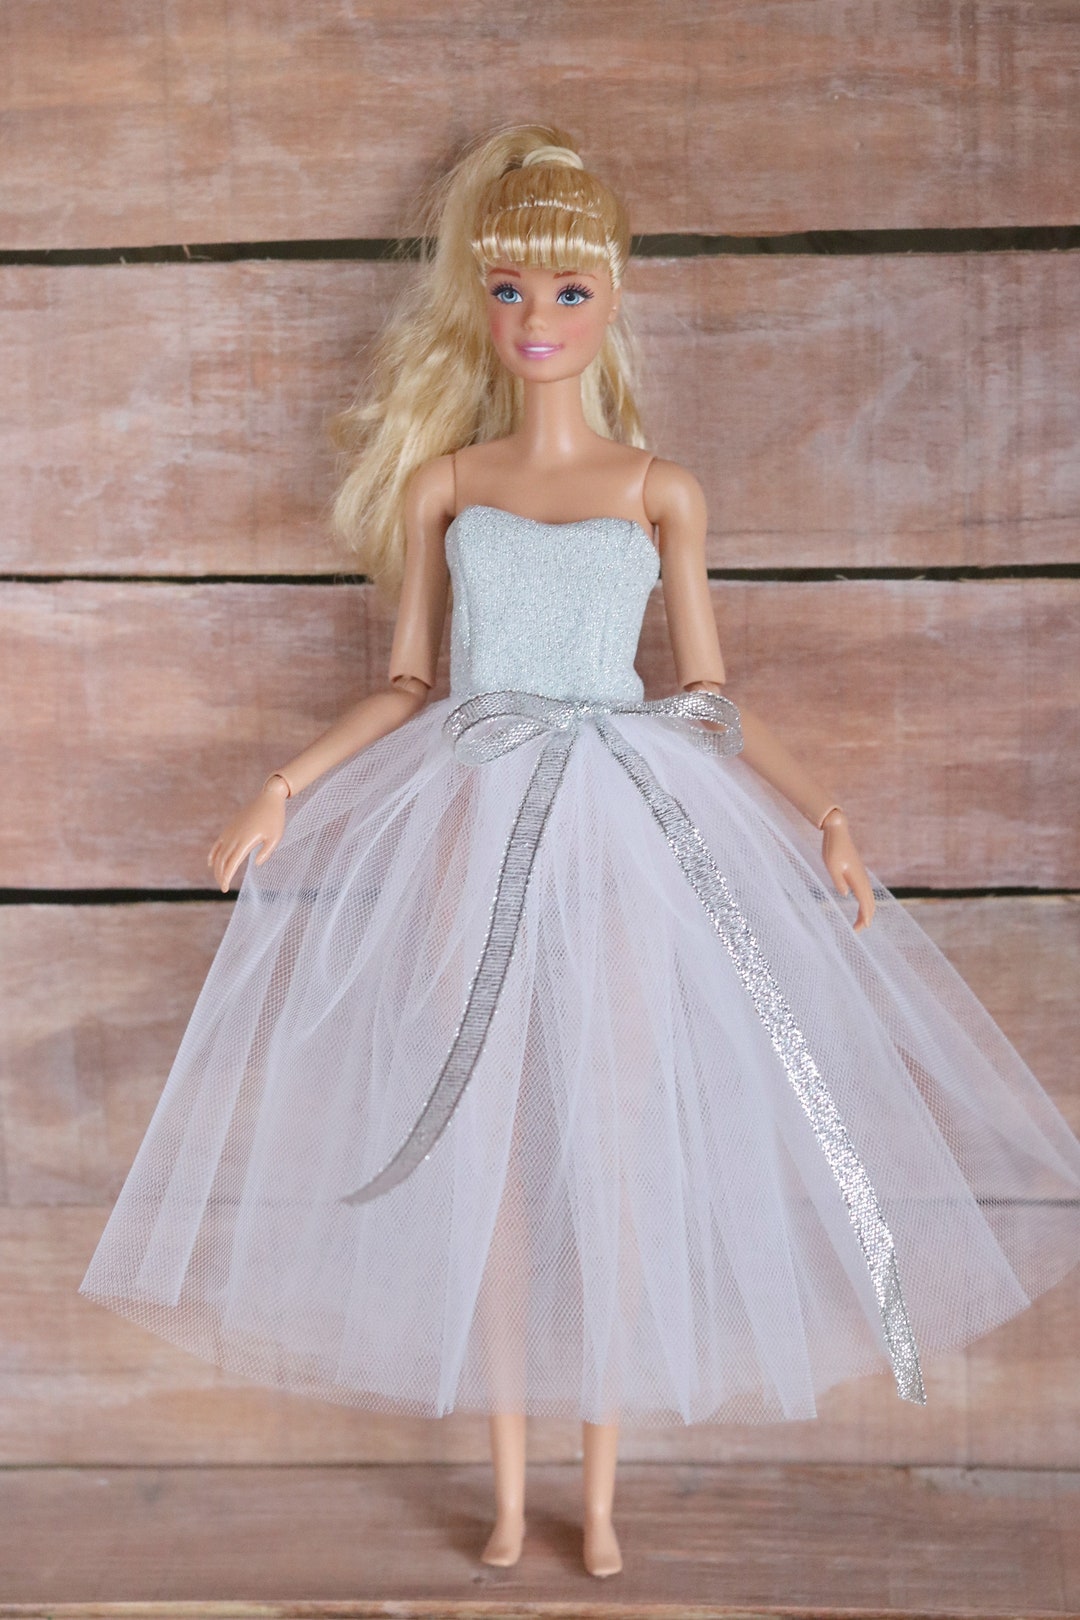 Wedding Dress for Barbie. Outfit for Doll. Barbie Clothes - Etsy